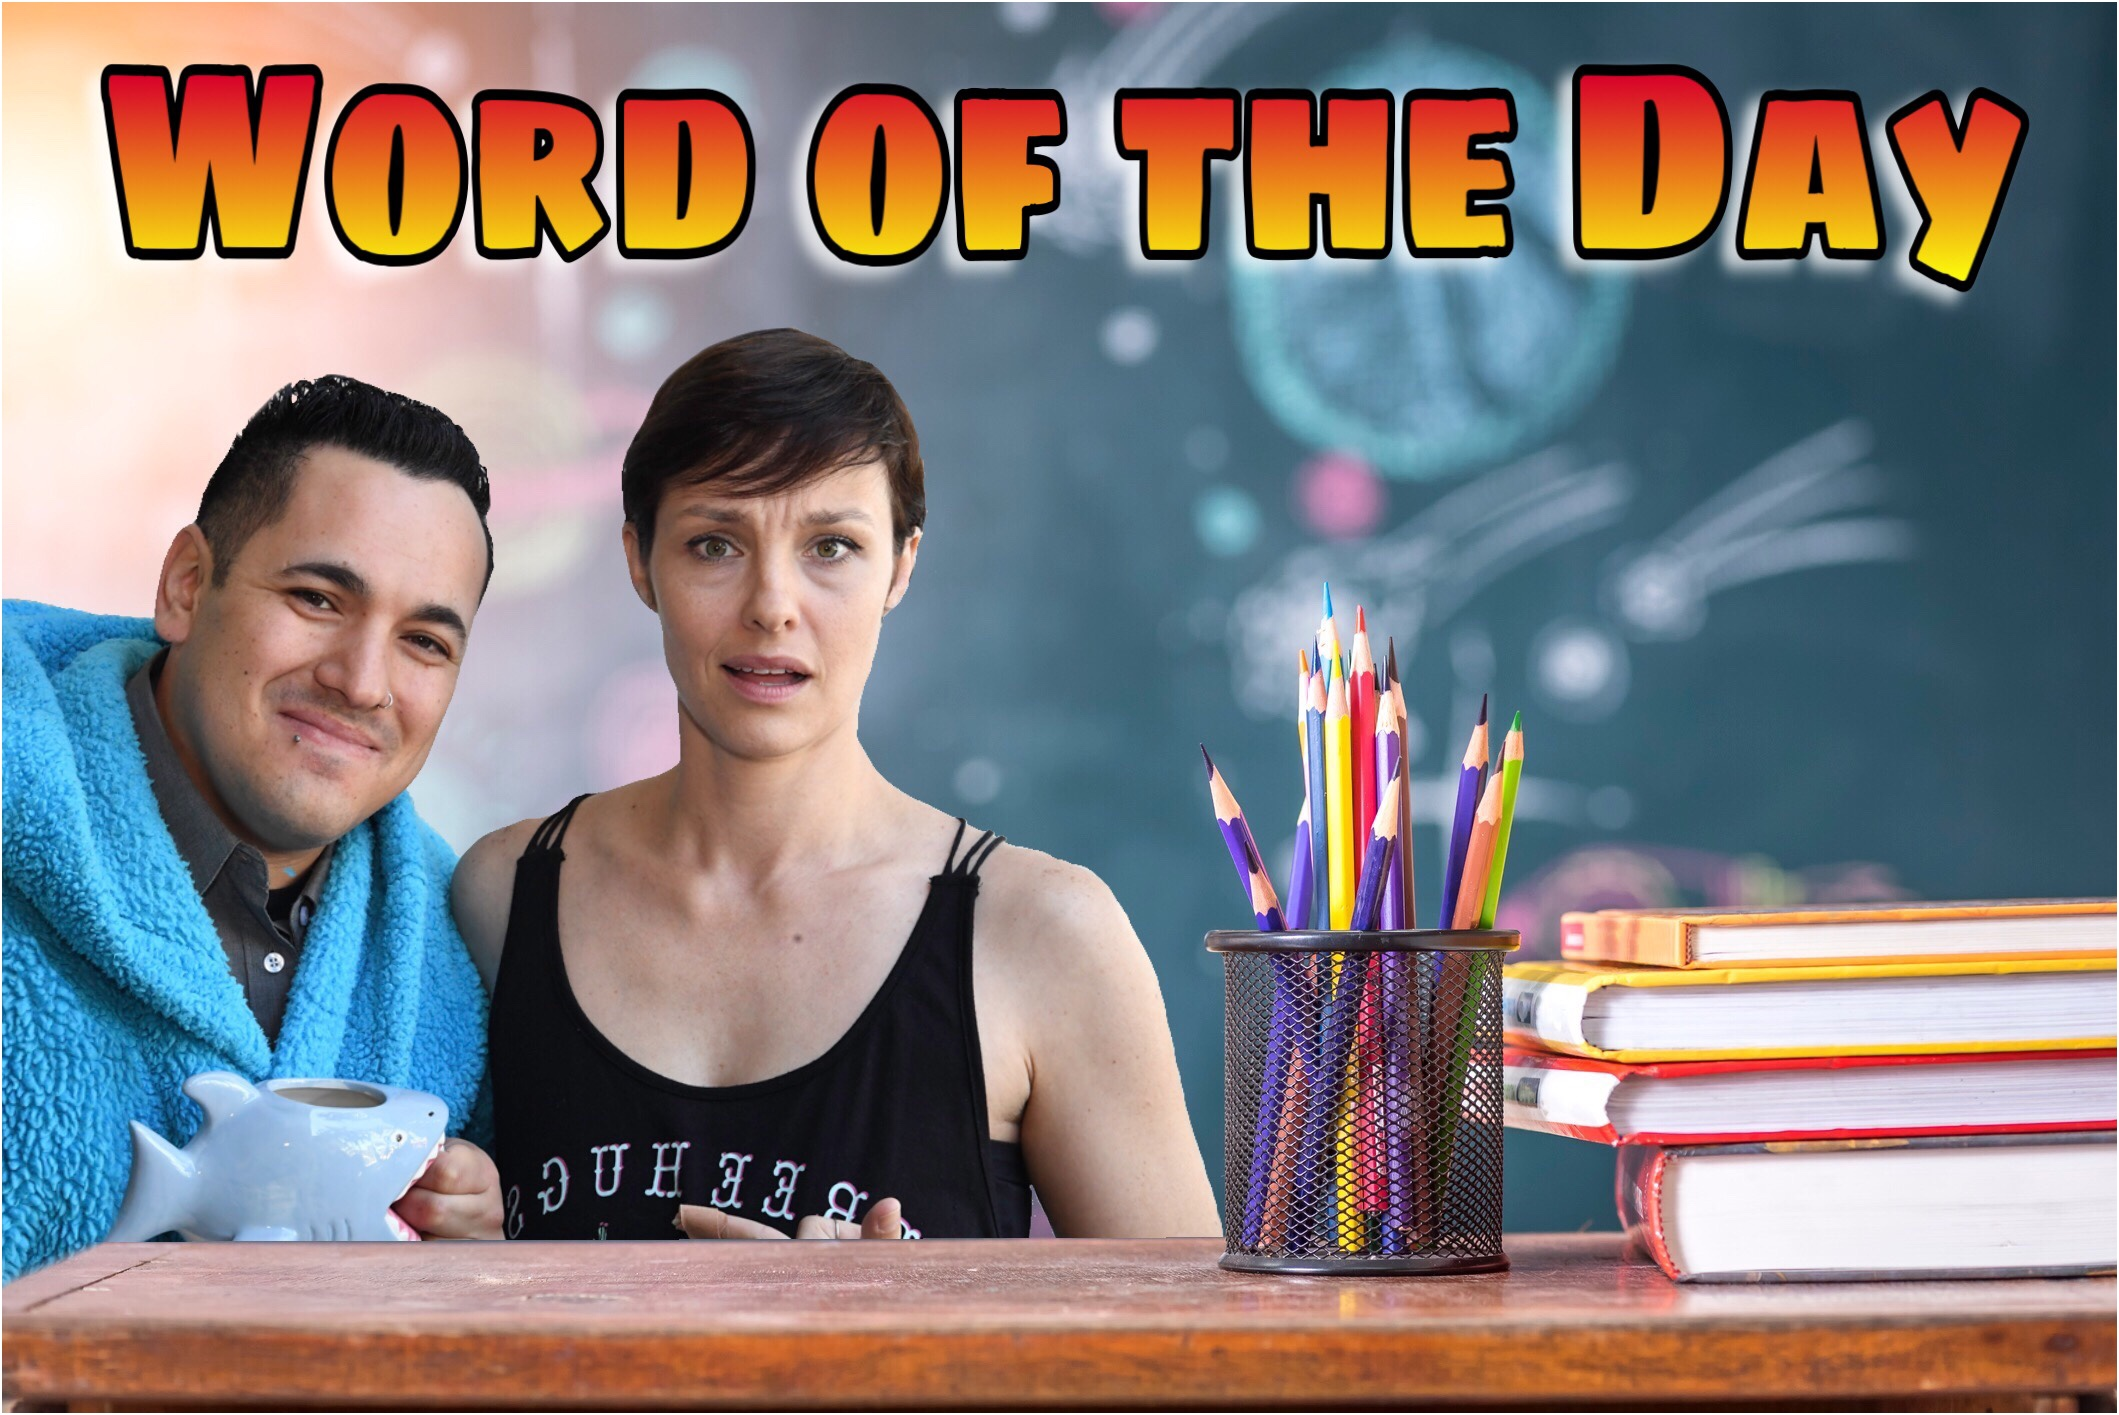 The Big Mistake - Word of the Day - Vicissitude